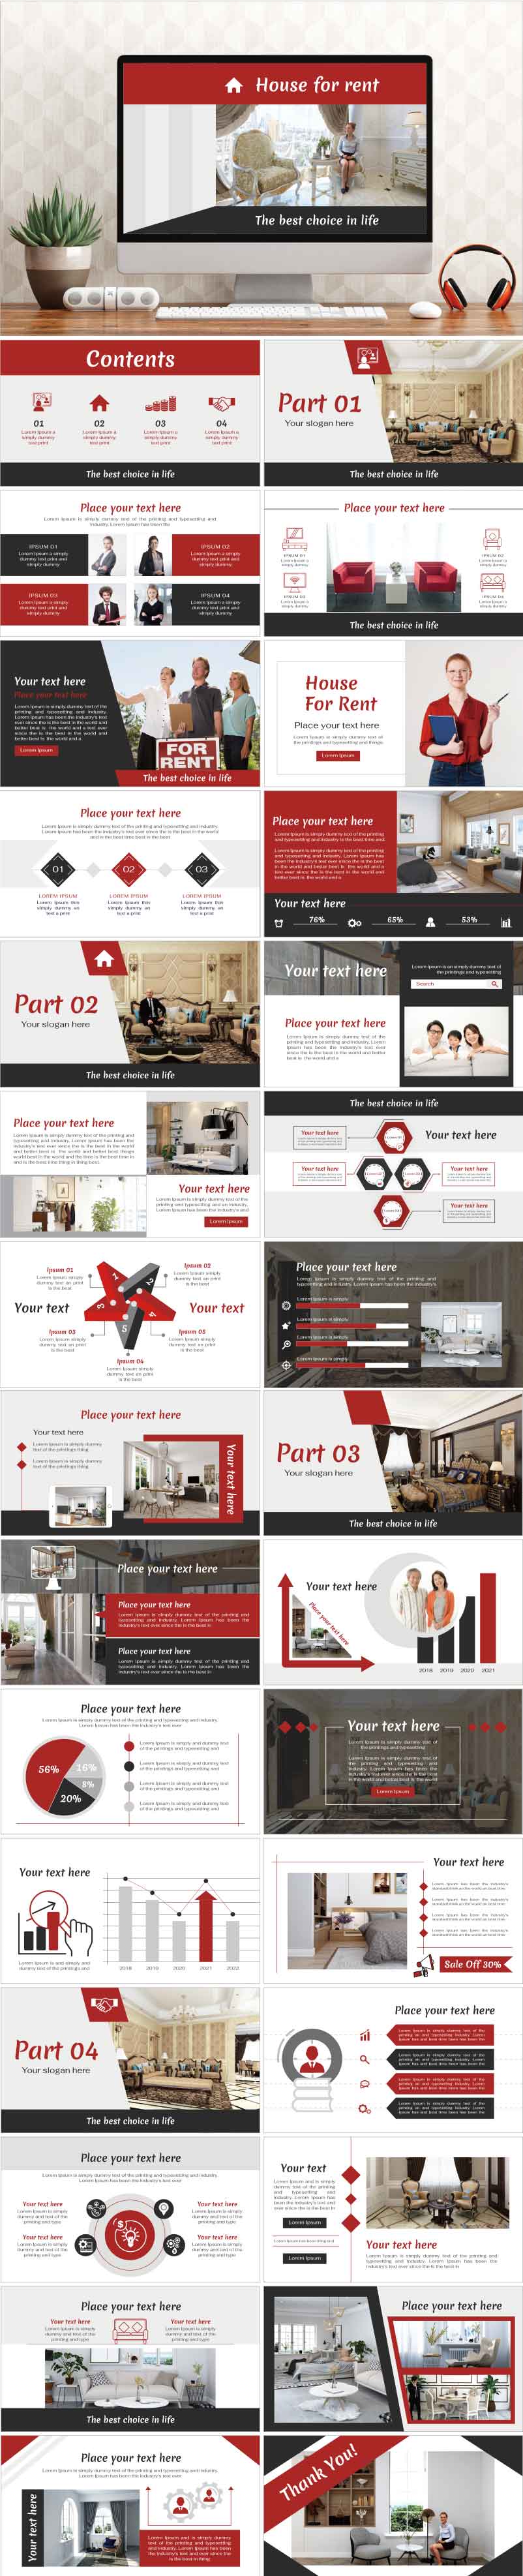 PowerPoint template vol.37